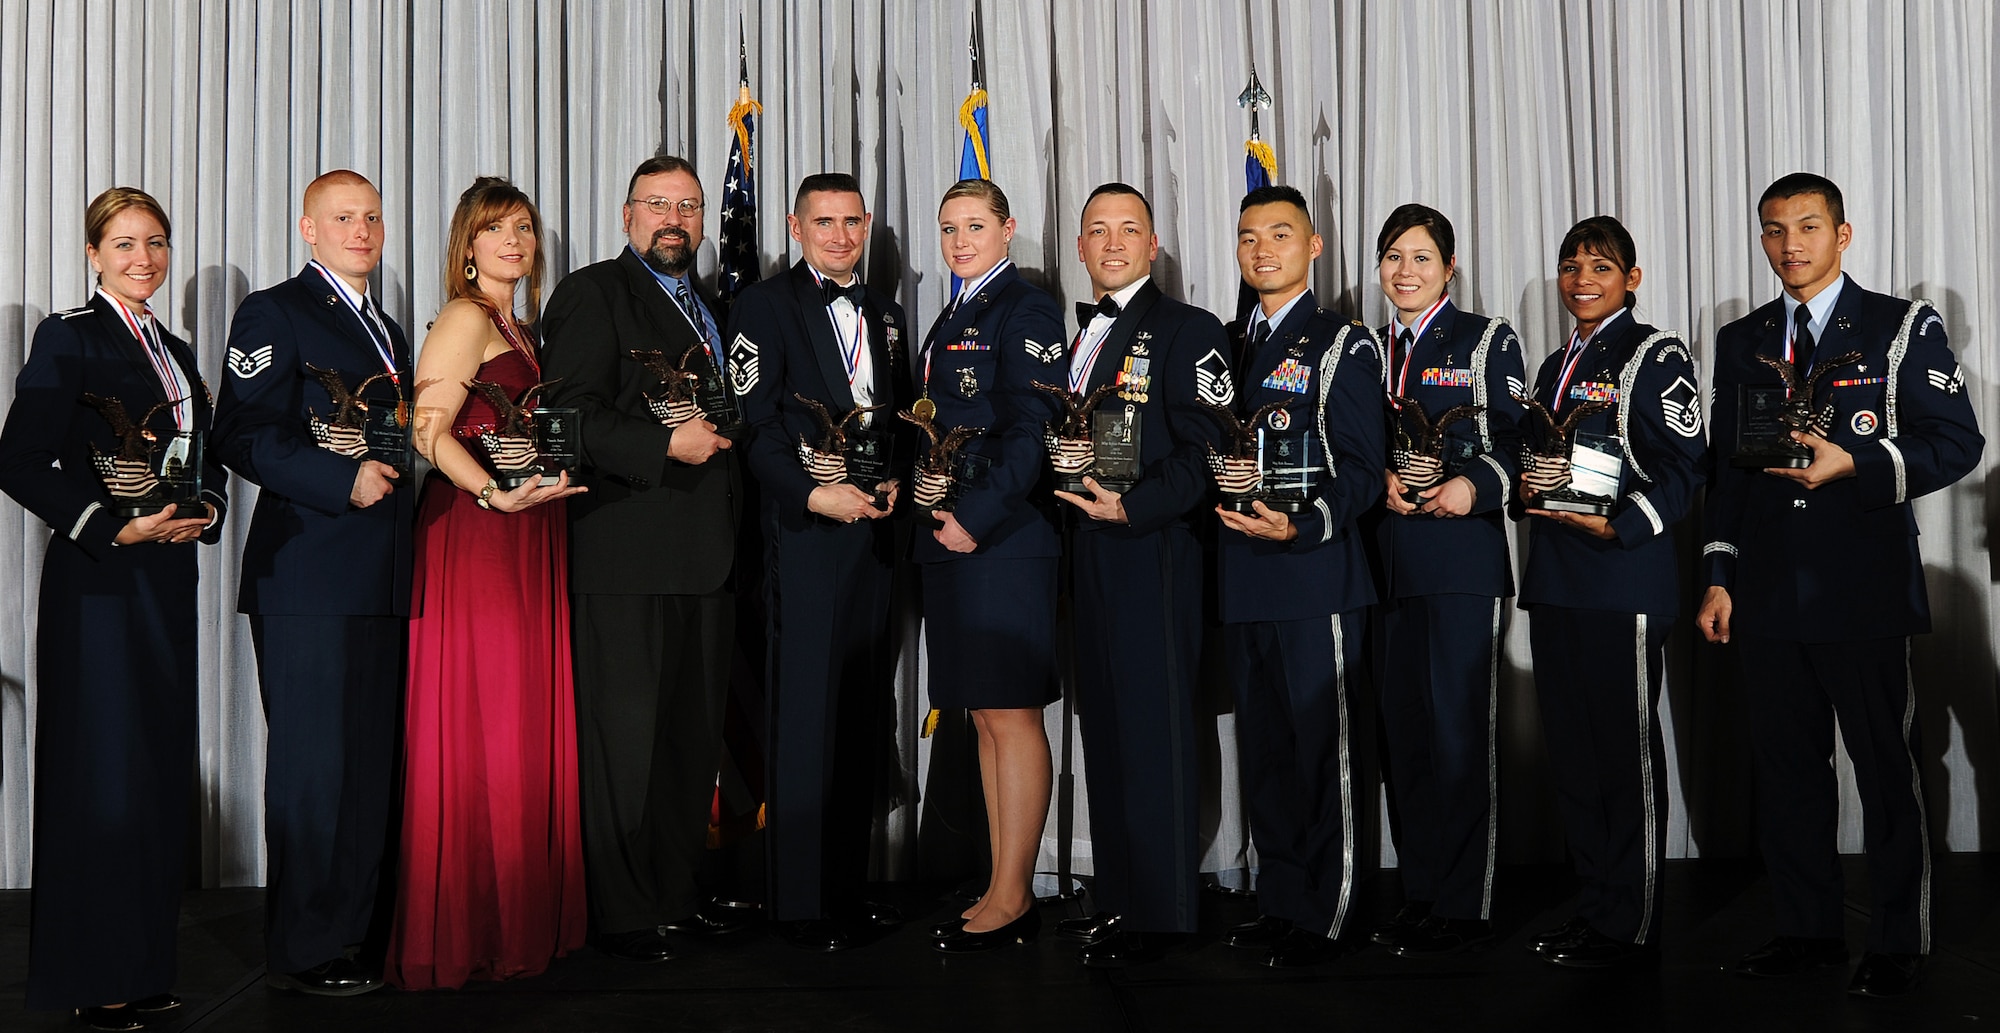 The winners of the 2009 Air Force Academy Awards are (left to right): Capt. Michelle Ruehl (company grade officer), Staff Sgt. Michael Clinkscales (NCO), Pamela Batzel (civilian category I), Erich Hoffmann (civilian category II), Senior Master Sgt. Roderick Schwald (first sergeant), Senior Airman Jessica Morehouse (Airman), Master Sgt. Robert Pemberton (senior NCO), Maj. Robert Bonner (Honor Guard officer), Staff Sgt. Michiyo Litynski (Honor Guard NCO), Master Sgt. Lissy Slezak (Honor Guard senior NCO) and Senior Airman Nhan Le (Honor Guard Airman). Not pictured is Keith Butala, the civilian category III winner. (U.S. Air Force photo/Rachel Boettcher)